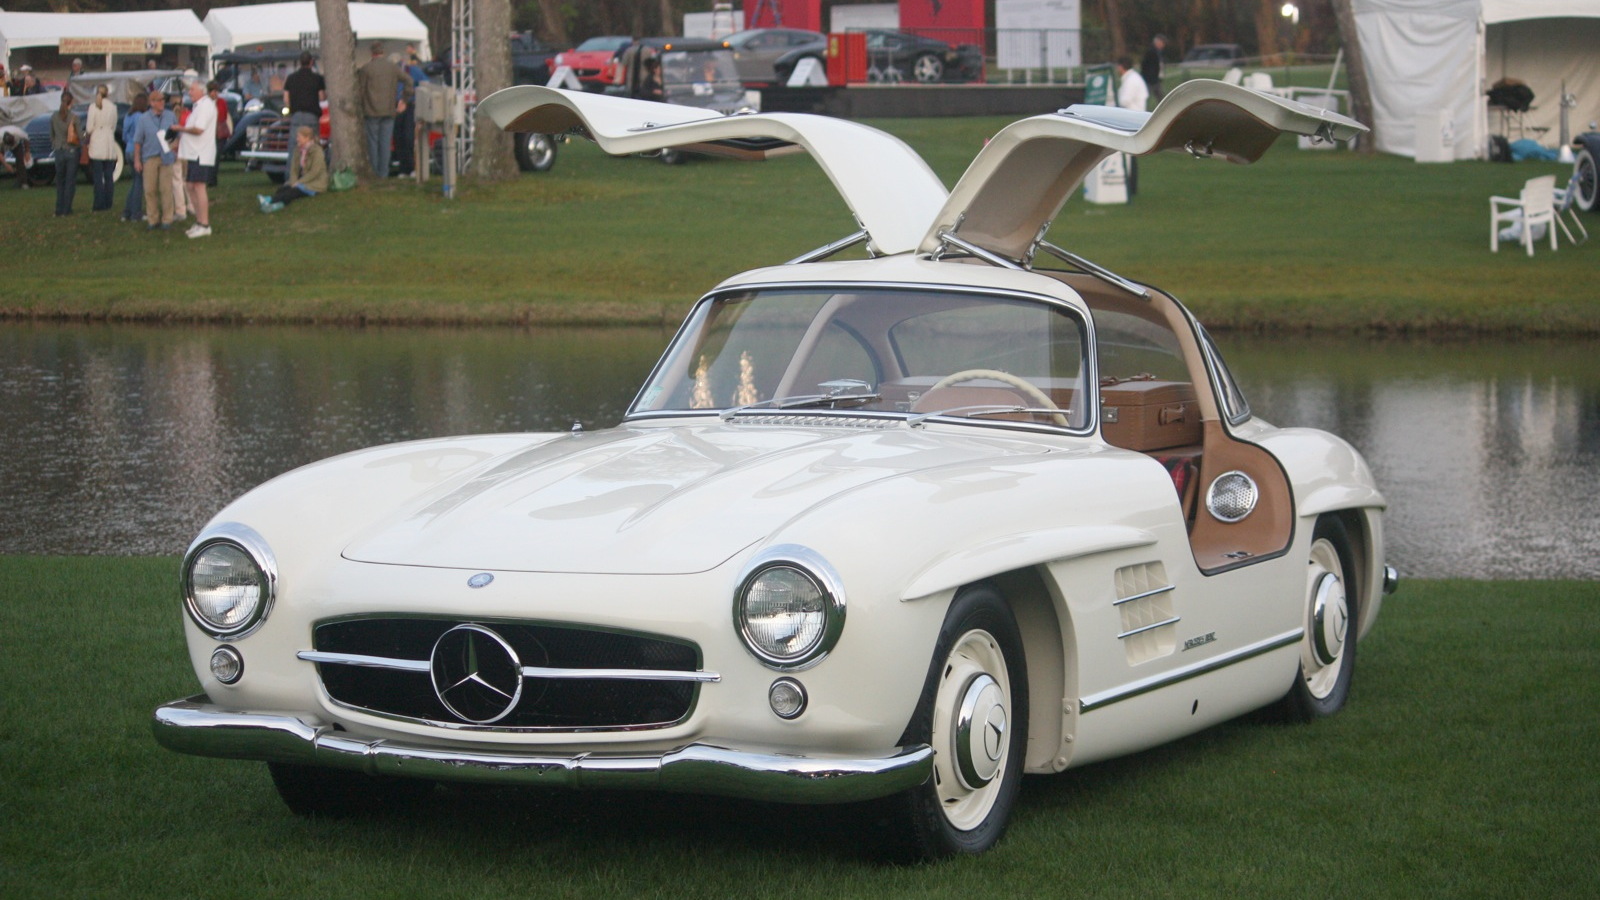 A Mercedes-Benz 300SL Gullwing coupe at Amelia Island